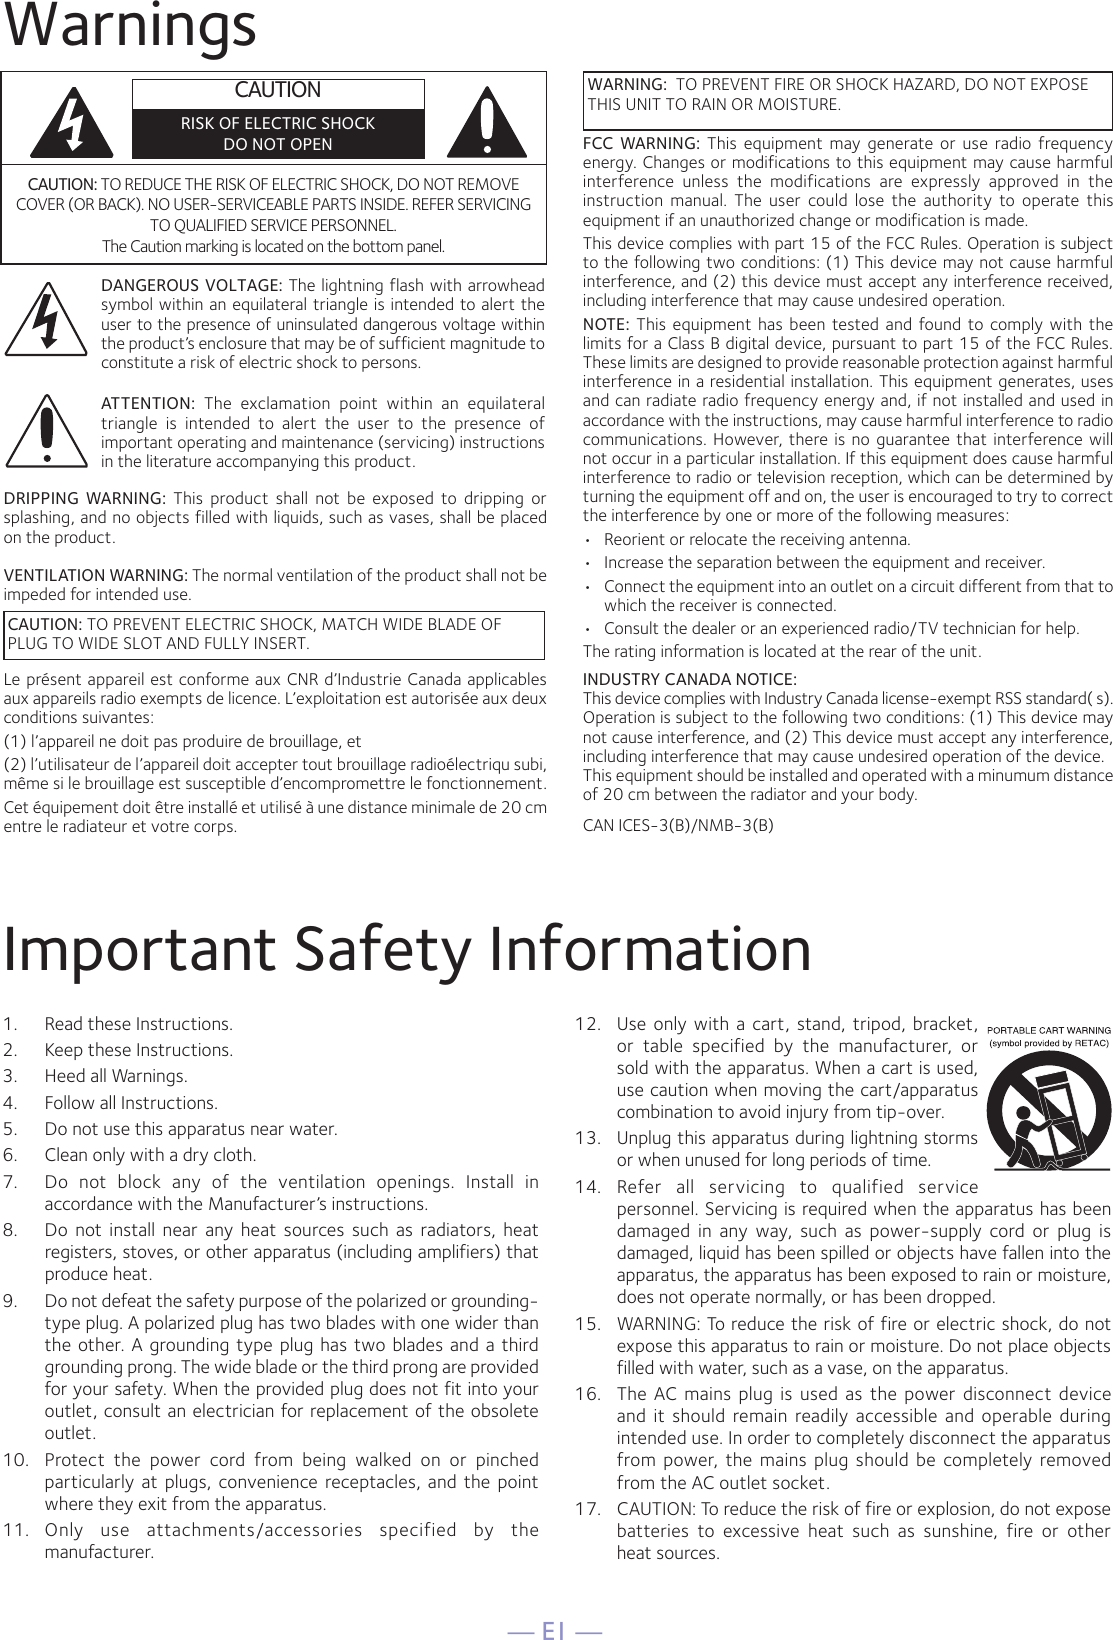 — E1 —WarningsImportant Safety Information1.  Read these Instructions.2.   Keep these Instructions.3.   Heed all Warnings.4.   Follow all Instructions.5.   Do not use this apparatus near water.6.   Clean only with a dry cloth.7.   Do  not  block  any  of  the  ventilation  openings.  Install  in accordance with the Manufacturer’s instructions.8.   Do  not  install  near  any  heat  sources  such  as  radiators,  heat registers, stoves, or other apparatus (including amplifiers) that produce heat.9.   Do not defeat the safety purpose of the polarized or grounding-type plug. A polarized plug has two blades with one wider than the  other. A  grounding  type  plug  has  two blades and  a third grounding prong. The wide blade or the third prong are provided for your safety. When the provided plug does not fit into your outlet, consult an electrician for replacement of the obsolete outlet.10.   Protect  the  power  cord  from  being  walked  on  or  pinched particularly  at  plugs,  convenience  receptacles,  and  the  point where they exit from the apparatus.11.   Only  use  attachments/accessories  specified  by  the manufacturer.12.   Use  only  with  a  cart,  stand,  tripod,  bracket, or  table  specified  by  the  manufacturer,  or sold with the apparatus. When a cart is used, use caution when moving the cart/apparatus combination to avoid injury from tip-over.13.   Unplug this apparatus during lightning storms or when unused for long periods of time.14.   Refer  all  servicing  to  qualified  service personnel. Servicing is required when the apparatus has been damaged  in  any  way,  such  as  power-supply  cord  or  plug  is damaged, liquid has been spilled or objects have fallen into the apparatus, the apparatus has been exposed to rain or moisture, does not operate normally, or has been dropped.15.   WARNING: To reduce the risk of fire or electric shock, do not expose this apparatus to rain or moisture. Do not place objects filled with water, such as a vase, on the apparatus.16.   The  AC  mains  plug  is  used  as  the  power  disconnect  device and  it  should  remain  readily  accessible  and  operable  during intended use. In order to completely disconnect the apparatus from  power,  the  mains  plug  should  be  completely  removed from the AC outlet socket.17.   CAUTION: To reduce the risk of fire or explosion, do not expose batteries  to  excessive  heat  such  as  sunshine,  fire  or  other  heat sources.CAUTION: TO REDUCE THE RISK OF ELECTRIC SHOCK, DO NOT REMOVE COVER (OR BACK). NO USER-SERVICEABLE PARTS INSIDE. REFER SERVICING TO QUALIFIED SERVICE PERSONNEL. The Caution marking is located on the bottom panel.DANGEROUS VOLTAGE: The lightning flash with arrowhead symbol within an equilateral triangle is intended to alert the user to the presence of uninsulated dangerous voltage within the product’s enclosure that may be of sufficient magnitude to constitute a risk of electric shock to persons.WARNING:  TO PREVENT FIRE OR SHOCK HAZARD, DO NOT EXPOSE THIS UNIT TO RAIN OR MOISTURE.ATTENTION:  The  exclamation  point  within  an  equilateral triangle  is  intended  to  alert  the  user  to  the  presence  of important operating and maintenance (servicing) instructions in the literature accompanying this product.FCC  WARNING:  This  equipment  may  generate  or  use  radio  frequency energy. Changes or modifications to this equipment may cause harmful interference  unless  the  modifications  are  expressly  approved  in  the instruction  manual.  The  user  could  lose  the  authority  to  operate  this equipment if an unauthorized change or modification is made.This device complies with part 15 of the FCC Rules. Operation is subject to the following two conditions: (1) This device may not cause harmful interference, and (2) this device must accept any interference received, including interference that may cause undesired operation.NOTE:  This  equipment  has  been  tested  and  found  to  comply  with  the limits for a Class B digital device, pursuant to part 15 of the FCC Rules. These limits are designed to provide reasonable protection against harmful interference in a residential installation. This equipment generates, uses and can radiate radio frequency energy and, if not installed and used in accordance with the instructions, may cause harmful interference to radio communications.  However, there is no guarantee  that  interference  will not occur in a particular installation. If this equipment does cause harmful interference to radio or television reception, which can be determined by turning the equipment off and on, the user is encouraged to try to correct the interference by one or more of the following measures:•  Reorient or relocate the receiving antenna.•  Increase the separation between the equipment and receiver.•  Connect the equipment into an outlet on a circuit different from that to which the receiver is connected.•  Consult the dealer or an experienced radio/TV technician for help.The rating information is located at the rear of the unit.INDUSTRY CANADA NOTICE:This device complies with Industry Canada license-exempt RSS standard( s).Operation is subject to the following two conditions: (1) This device may not cause interference, and (2) This device must accept any interference, including interference that may cause undesired operation of the device.This equipment should be installed and operated with a minumum distance of 20 cm between the radiator and your body.DRIPPING  WARNING:  This  product  shall  not  be  exposed  to  dripping  or splashing, and no objects filled with liquids, such as vases, shall be placed on the product.VENTILATION WARNING: The normal ventilation of the product shall not be impeded for intended use.Le présent appareil est conforme aux CNR d’Industrie Canada applicables aux appareils radio exempts de licence. L’exploitation est autorisée aux deux conditions suivantes:(1) l’appareil ne doit pas produire de brouillage, et(2) l’utilisateur de l’appareil doit accepter tout brouillage radioélectriqu subi, même si le brouillage est susceptible d’encompromettre le fonctionnement. Cet équipement doit être installé et utilisé à une distance minimale de 20 cm entre le radiateur et votre corps.CAUTIONRISK OF ELECTRIC SHOCKDO NOT OPENCAUTION: TO PREVENT ELECTRIC SHOCK, MATCH WIDE BLADE OFPLUG TO WIDE SLOT AND FULLY INSERT.CAN ICES-3(B)/NMB-3(B)